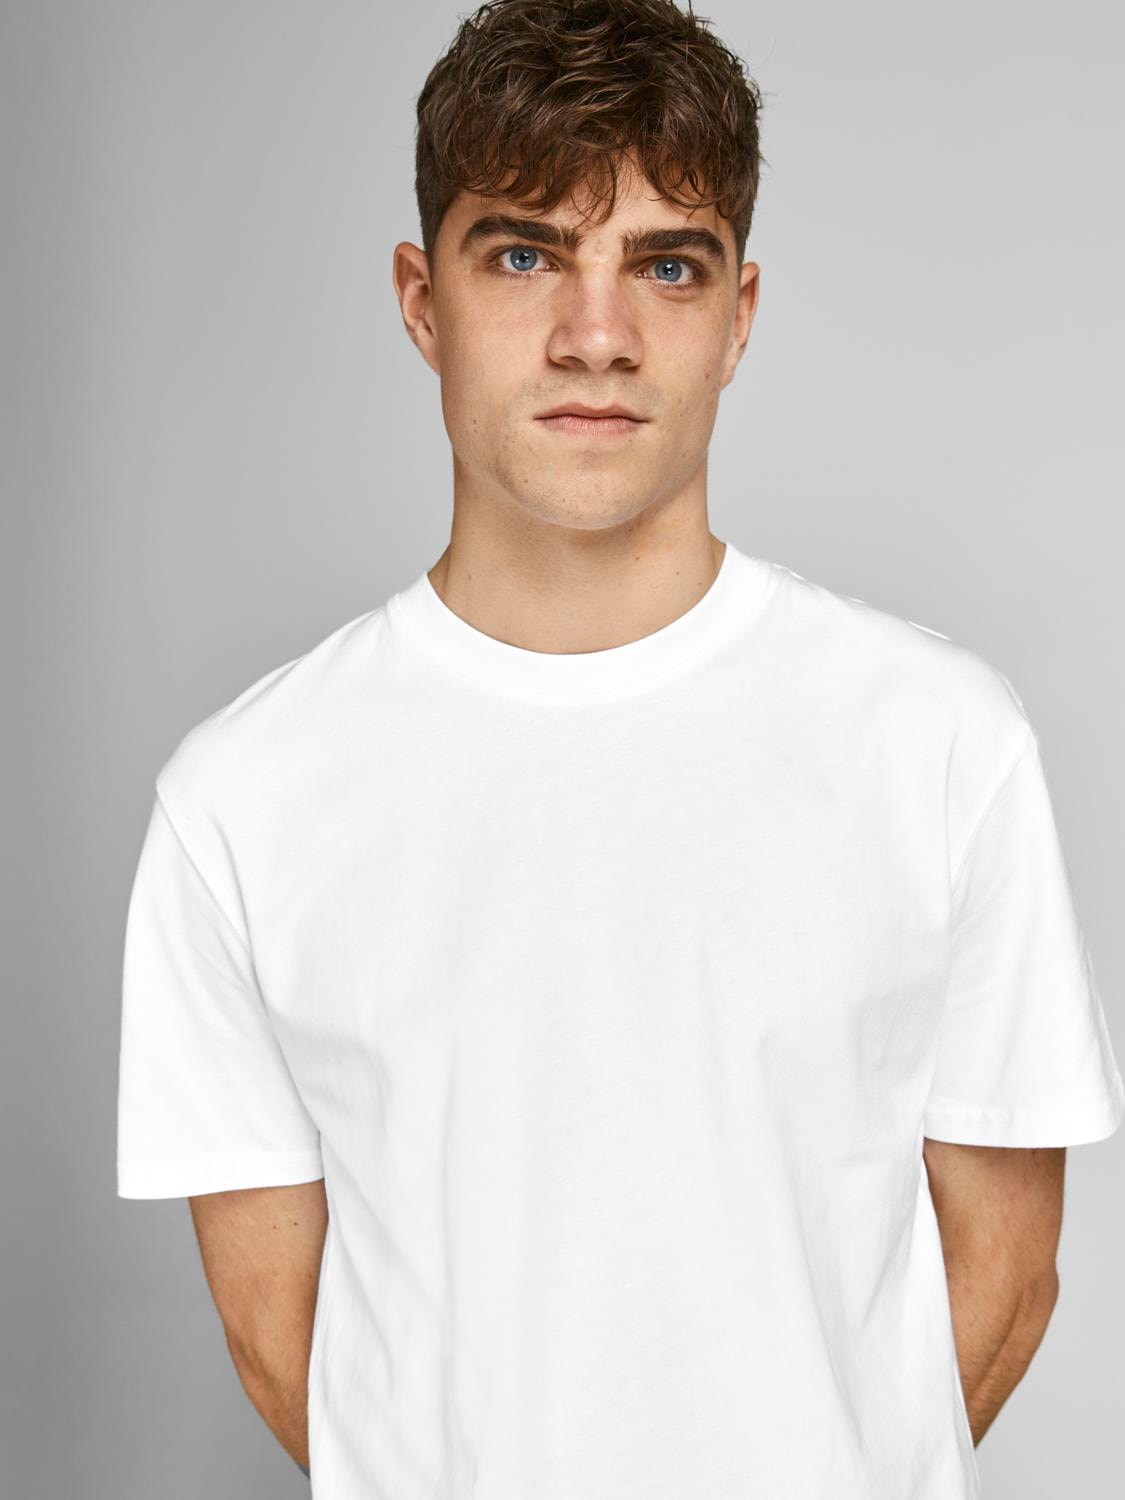 Jack & Jones Relaxed Fit O-Neck T-Shirt -White - 12190467